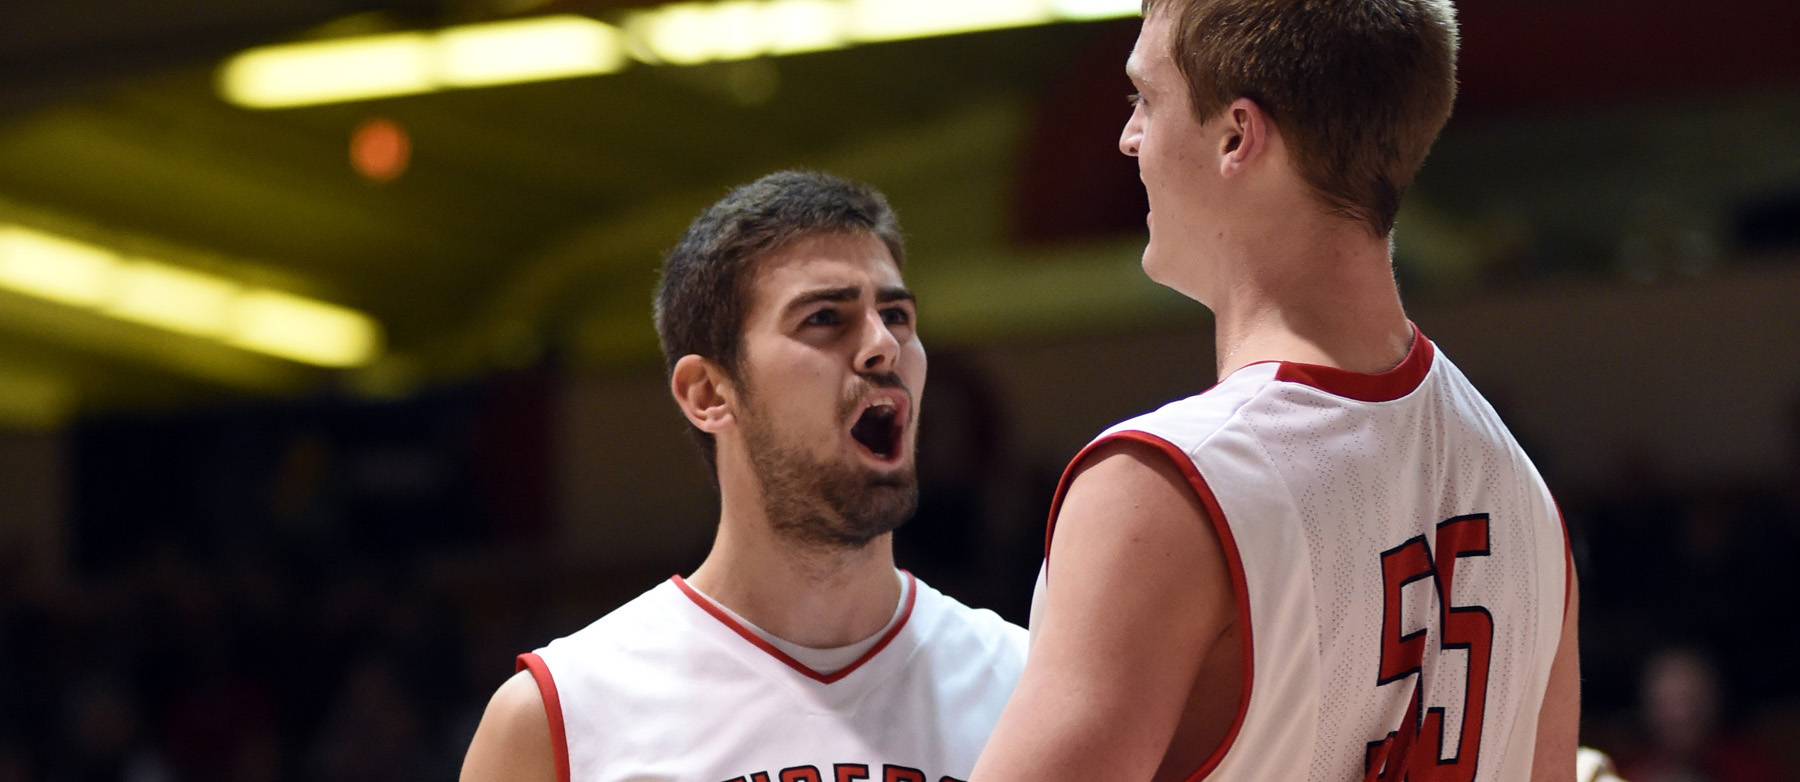 Wittenberg Trounces Opposing Tigers at Home, 85-53